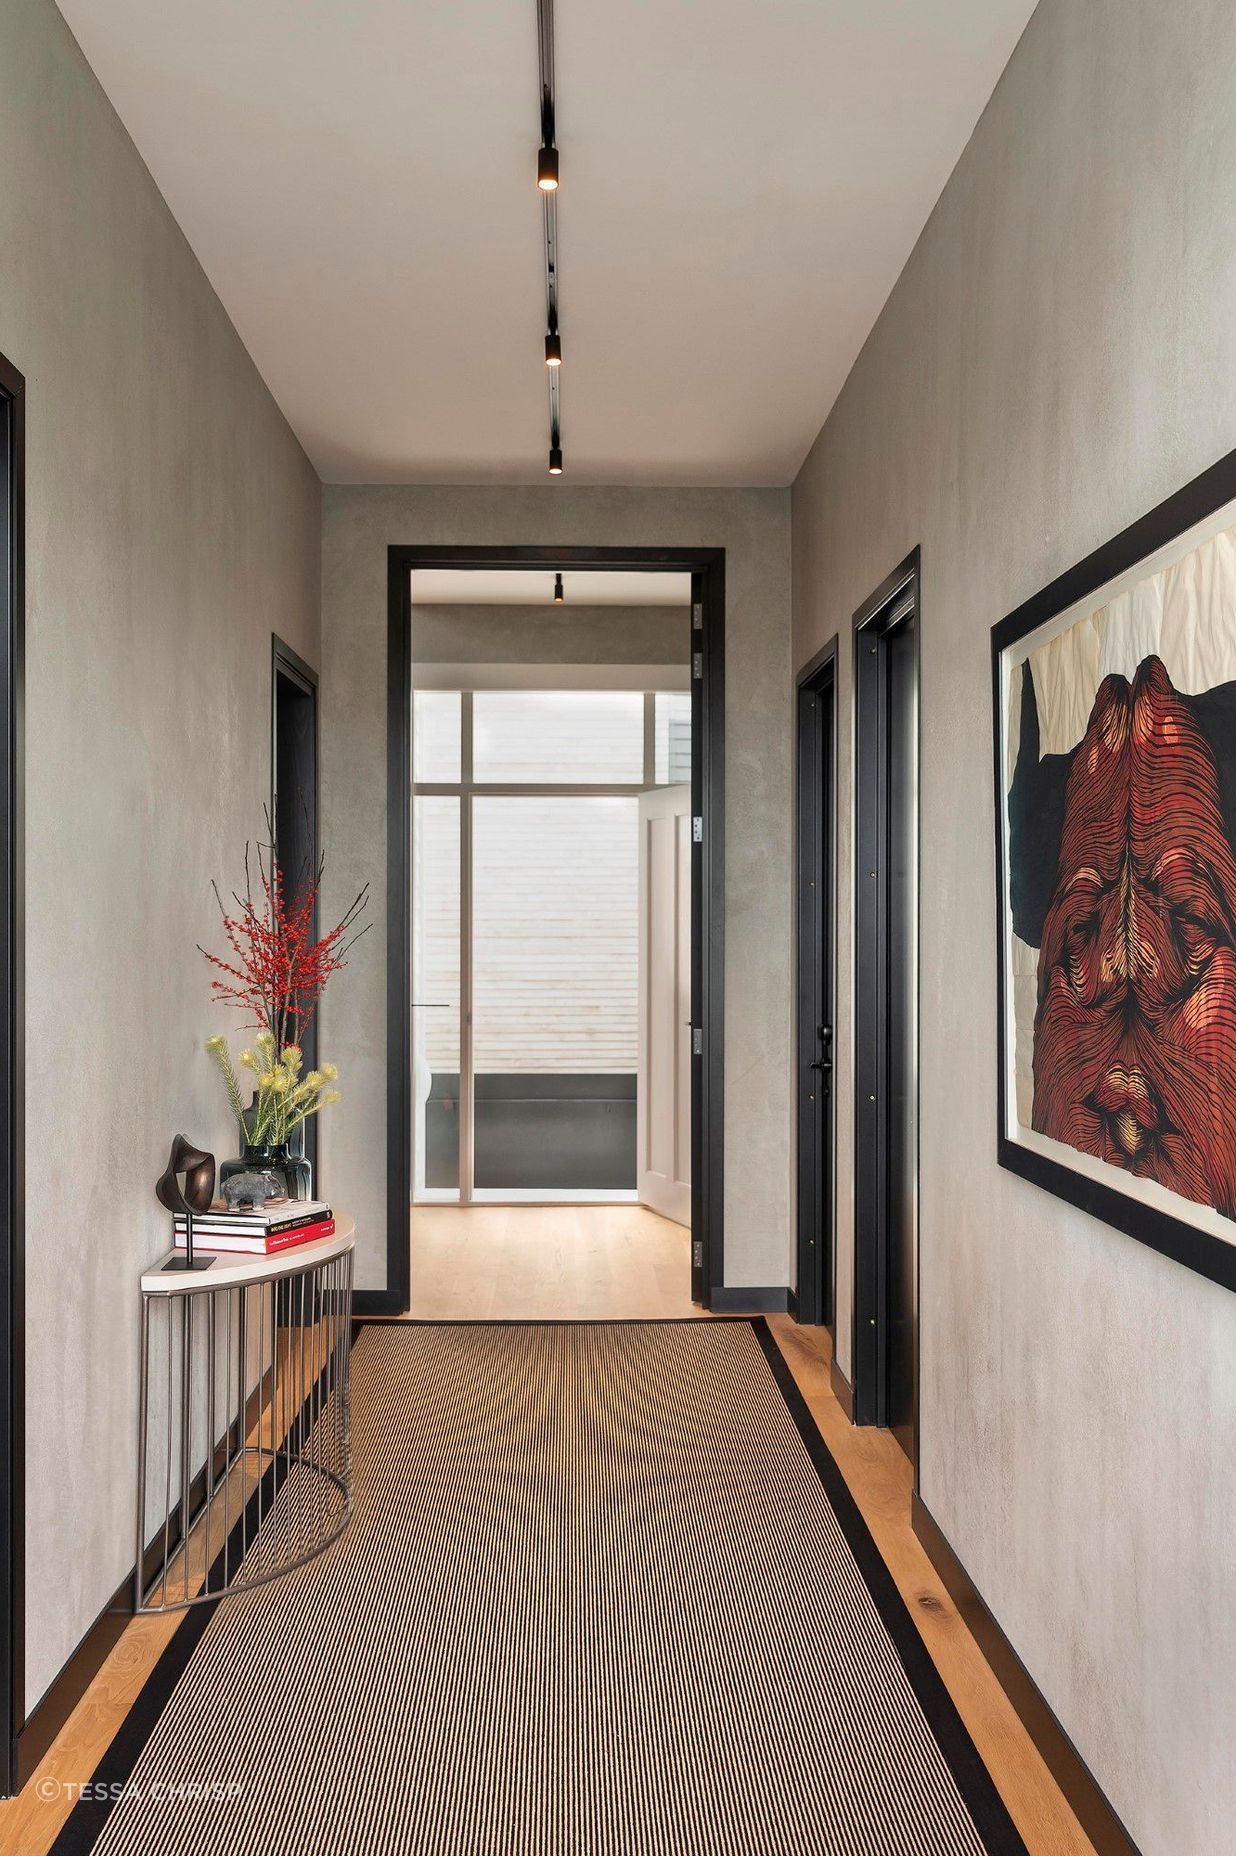 The entry hallway was elevated with textured walls and a fascinating bull artwork by David Ellis.